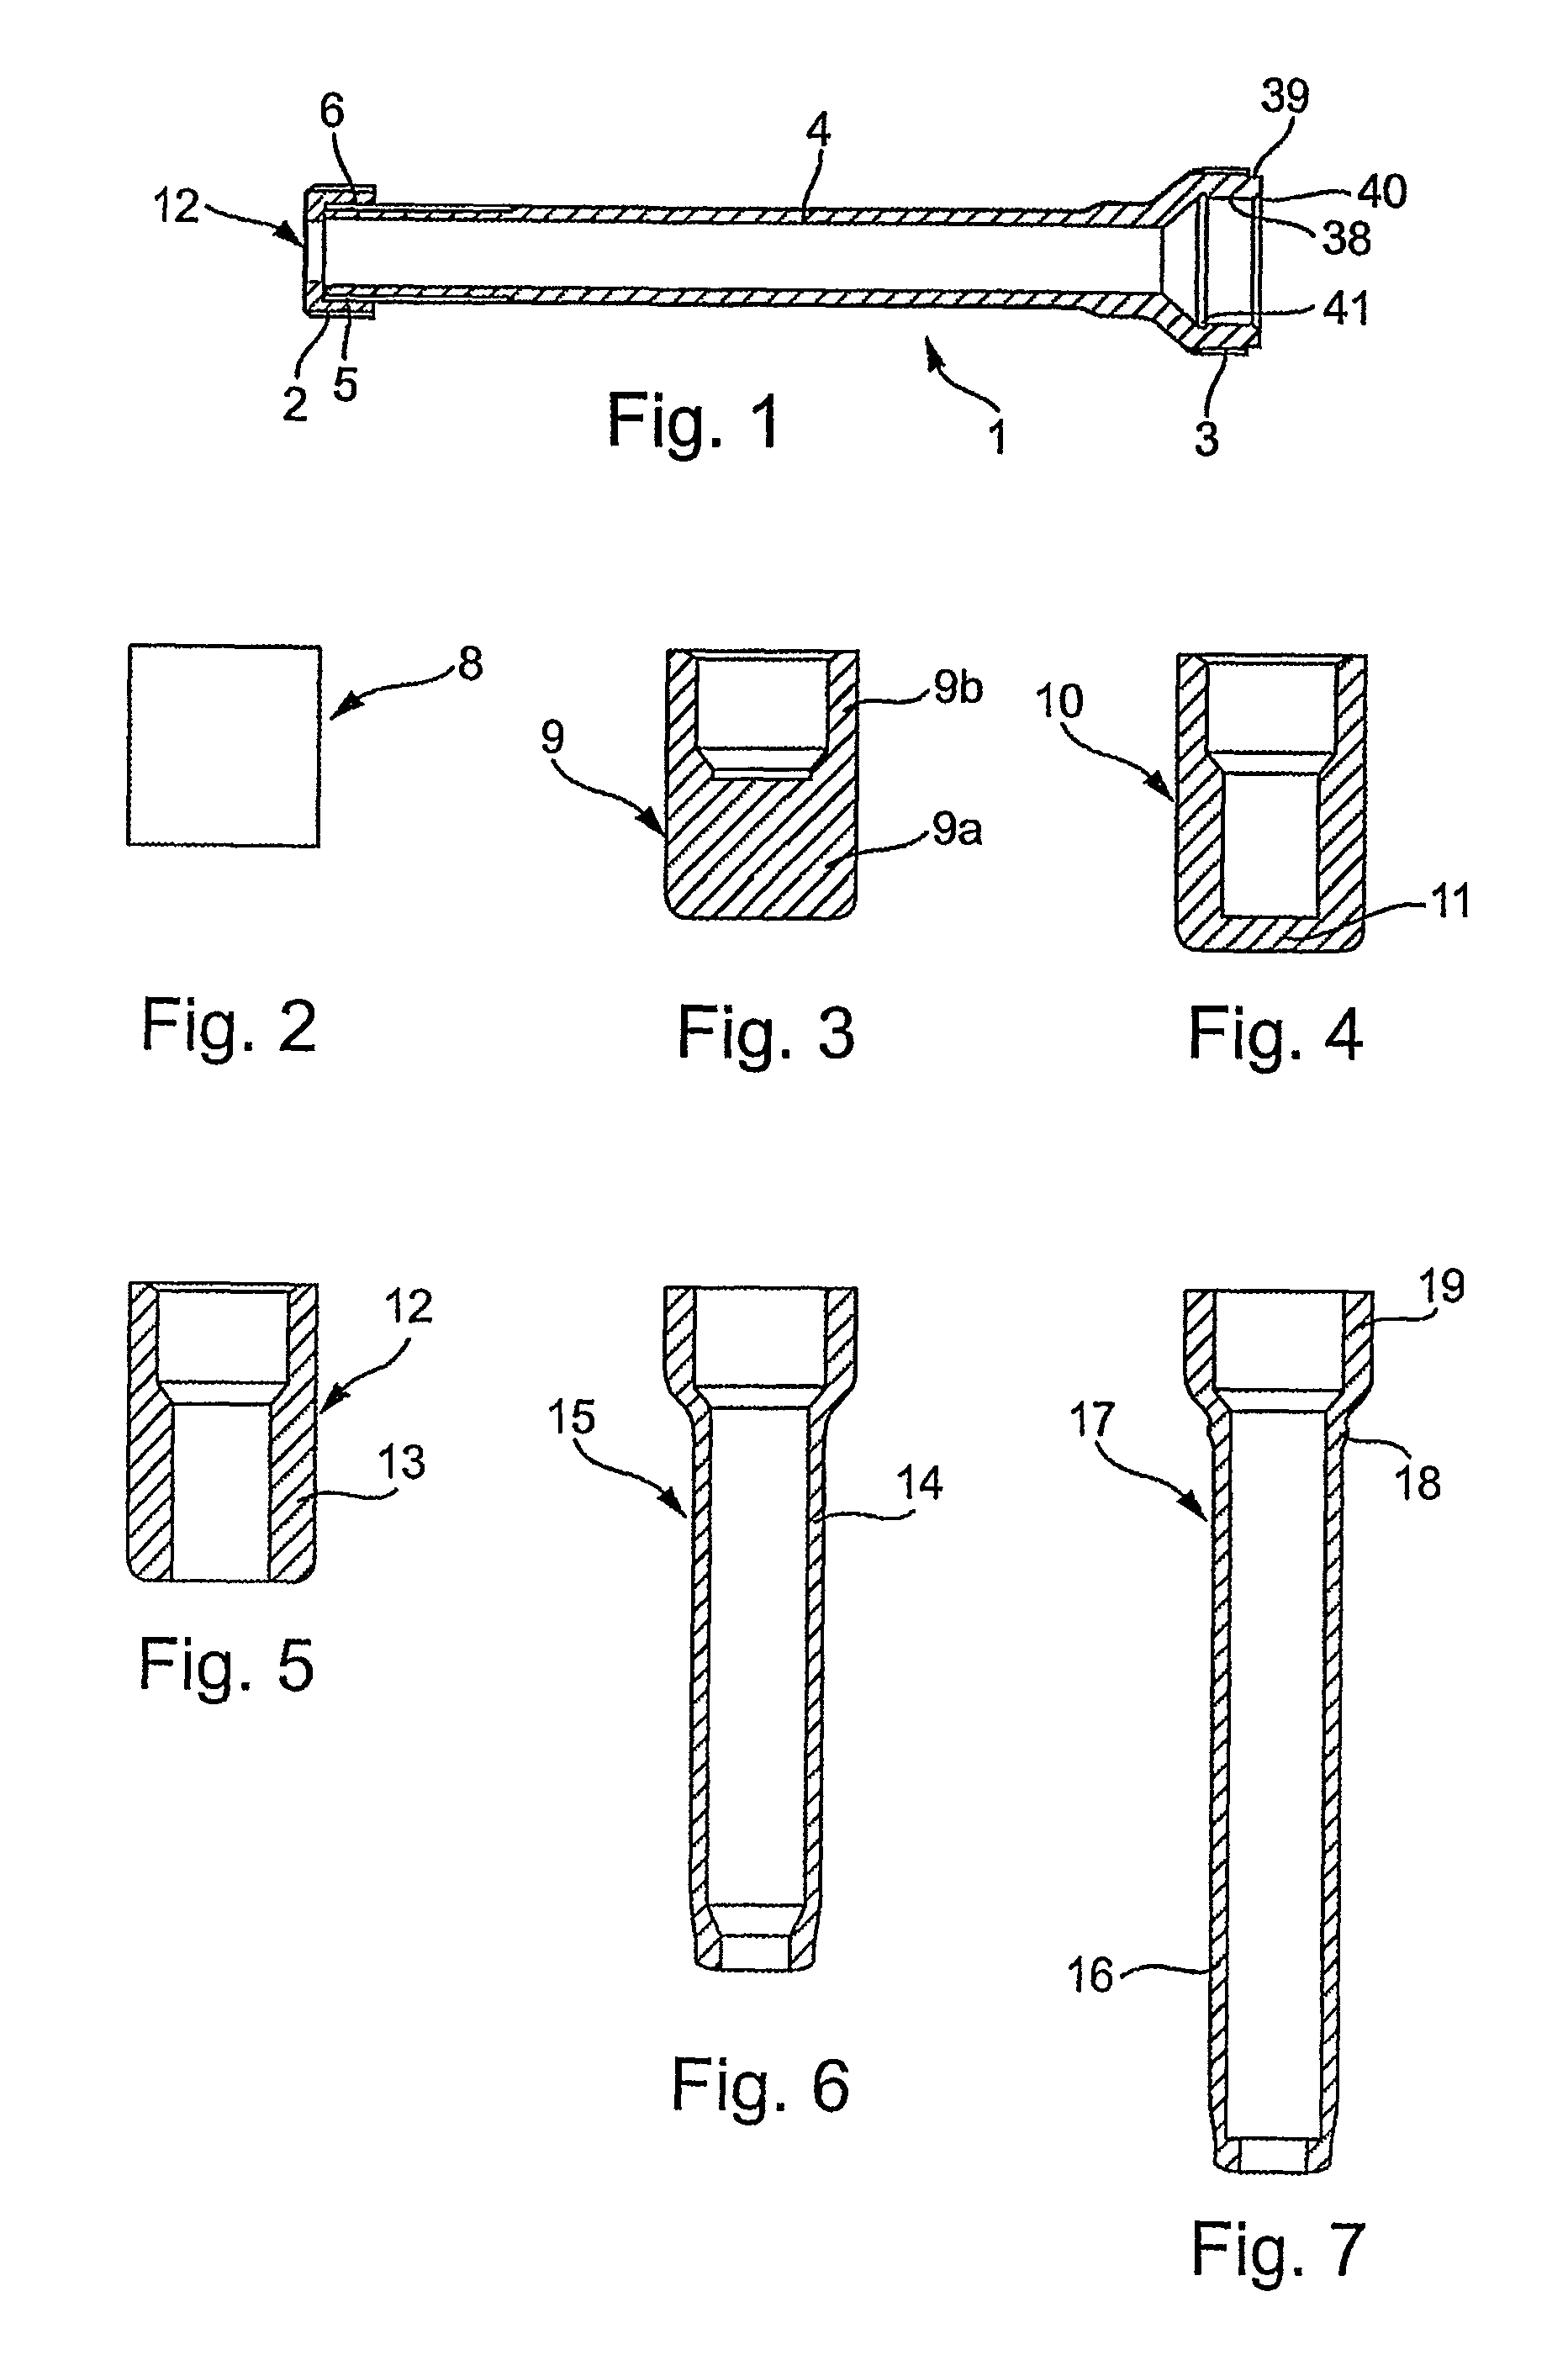 Method of producing a hollow shaft